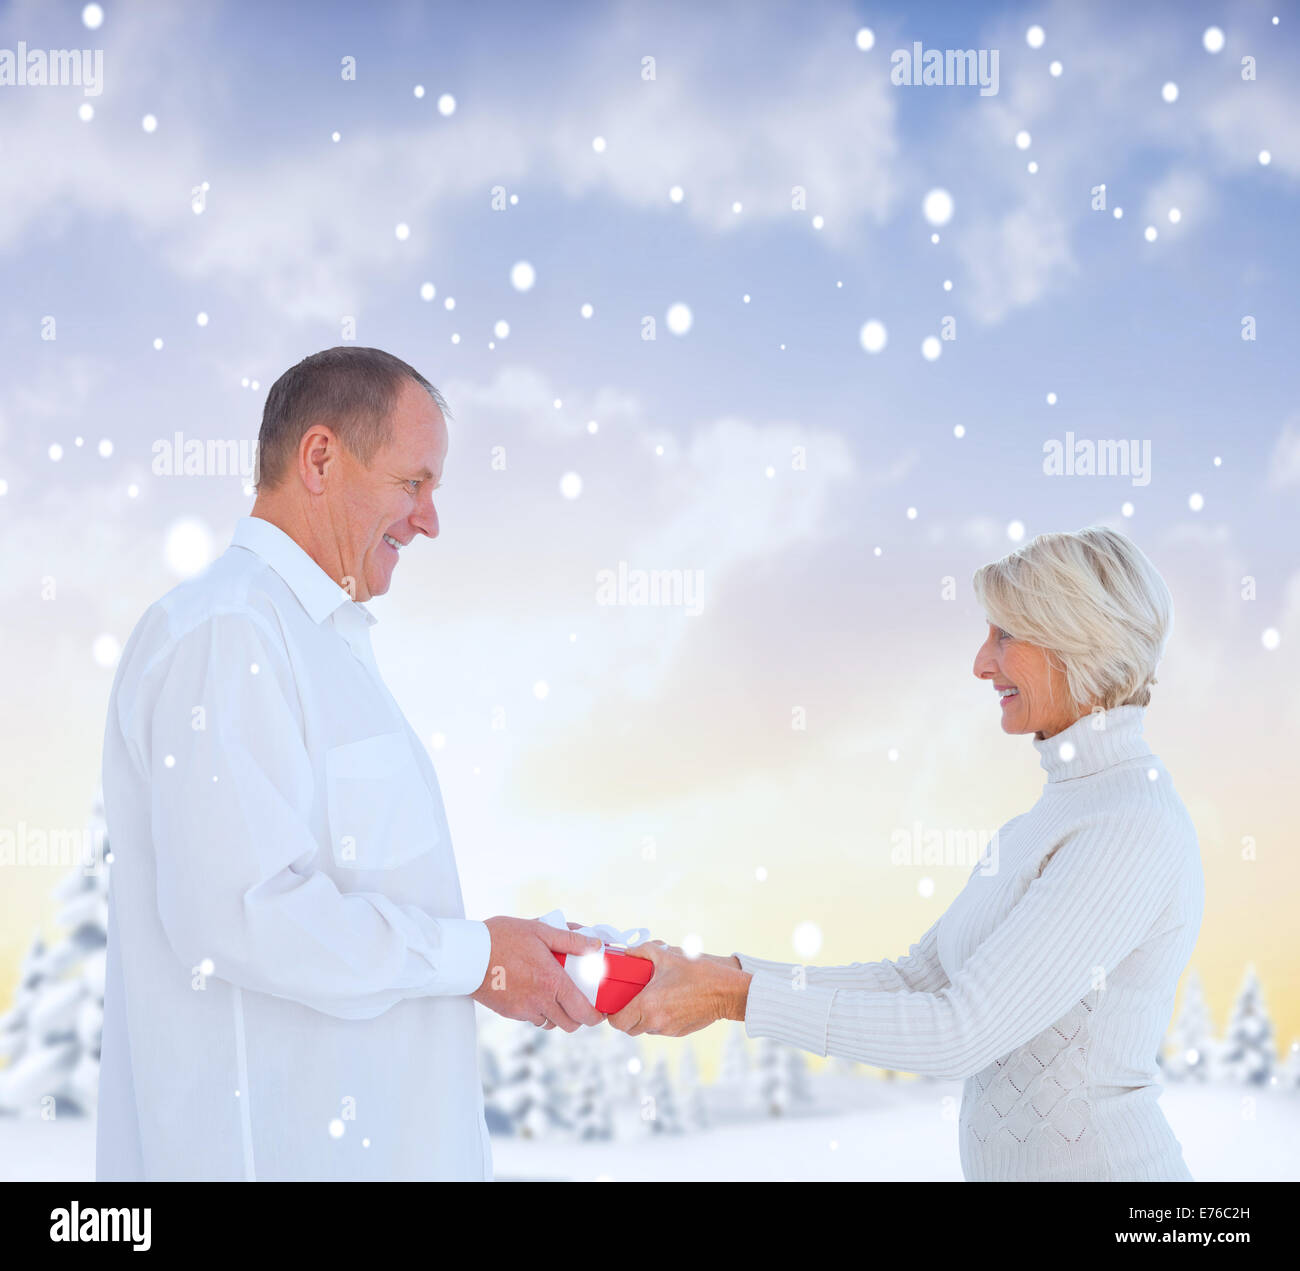 Composite image of couple exchanging gift Stock Photo